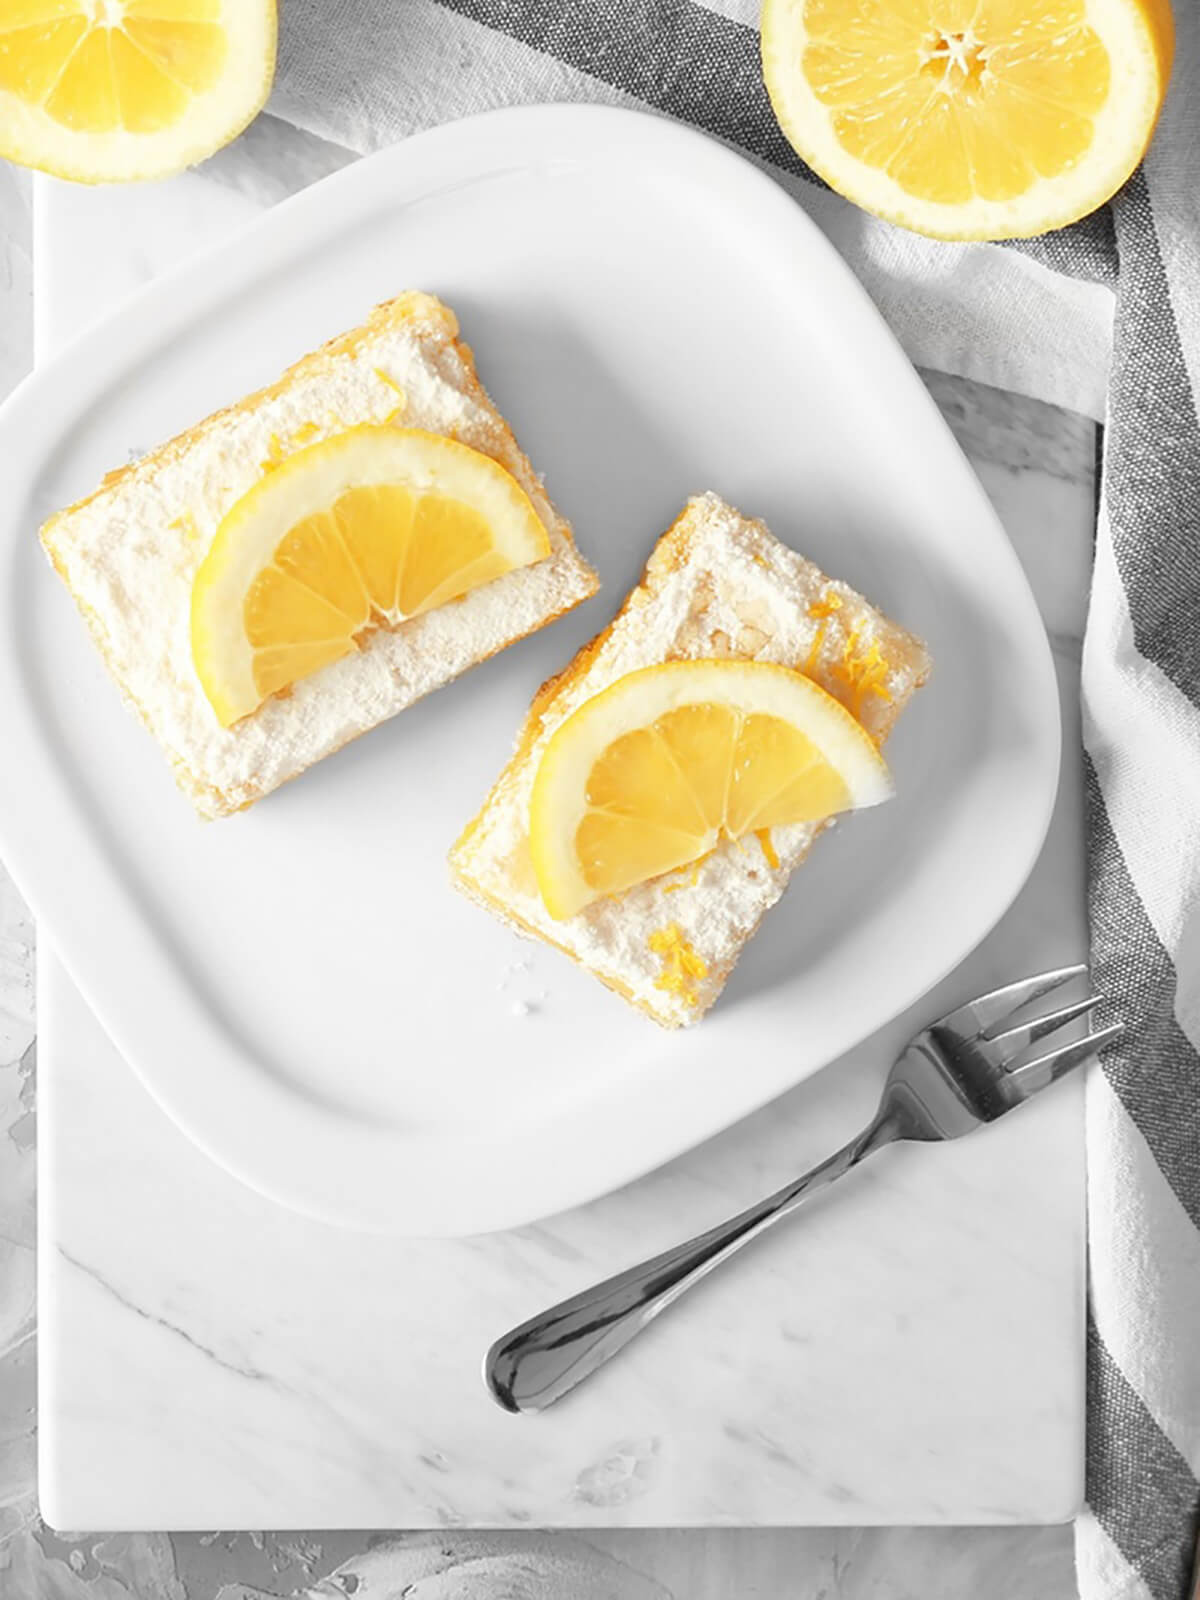 vegan lemon bars decorated with half lemons on top with a fork